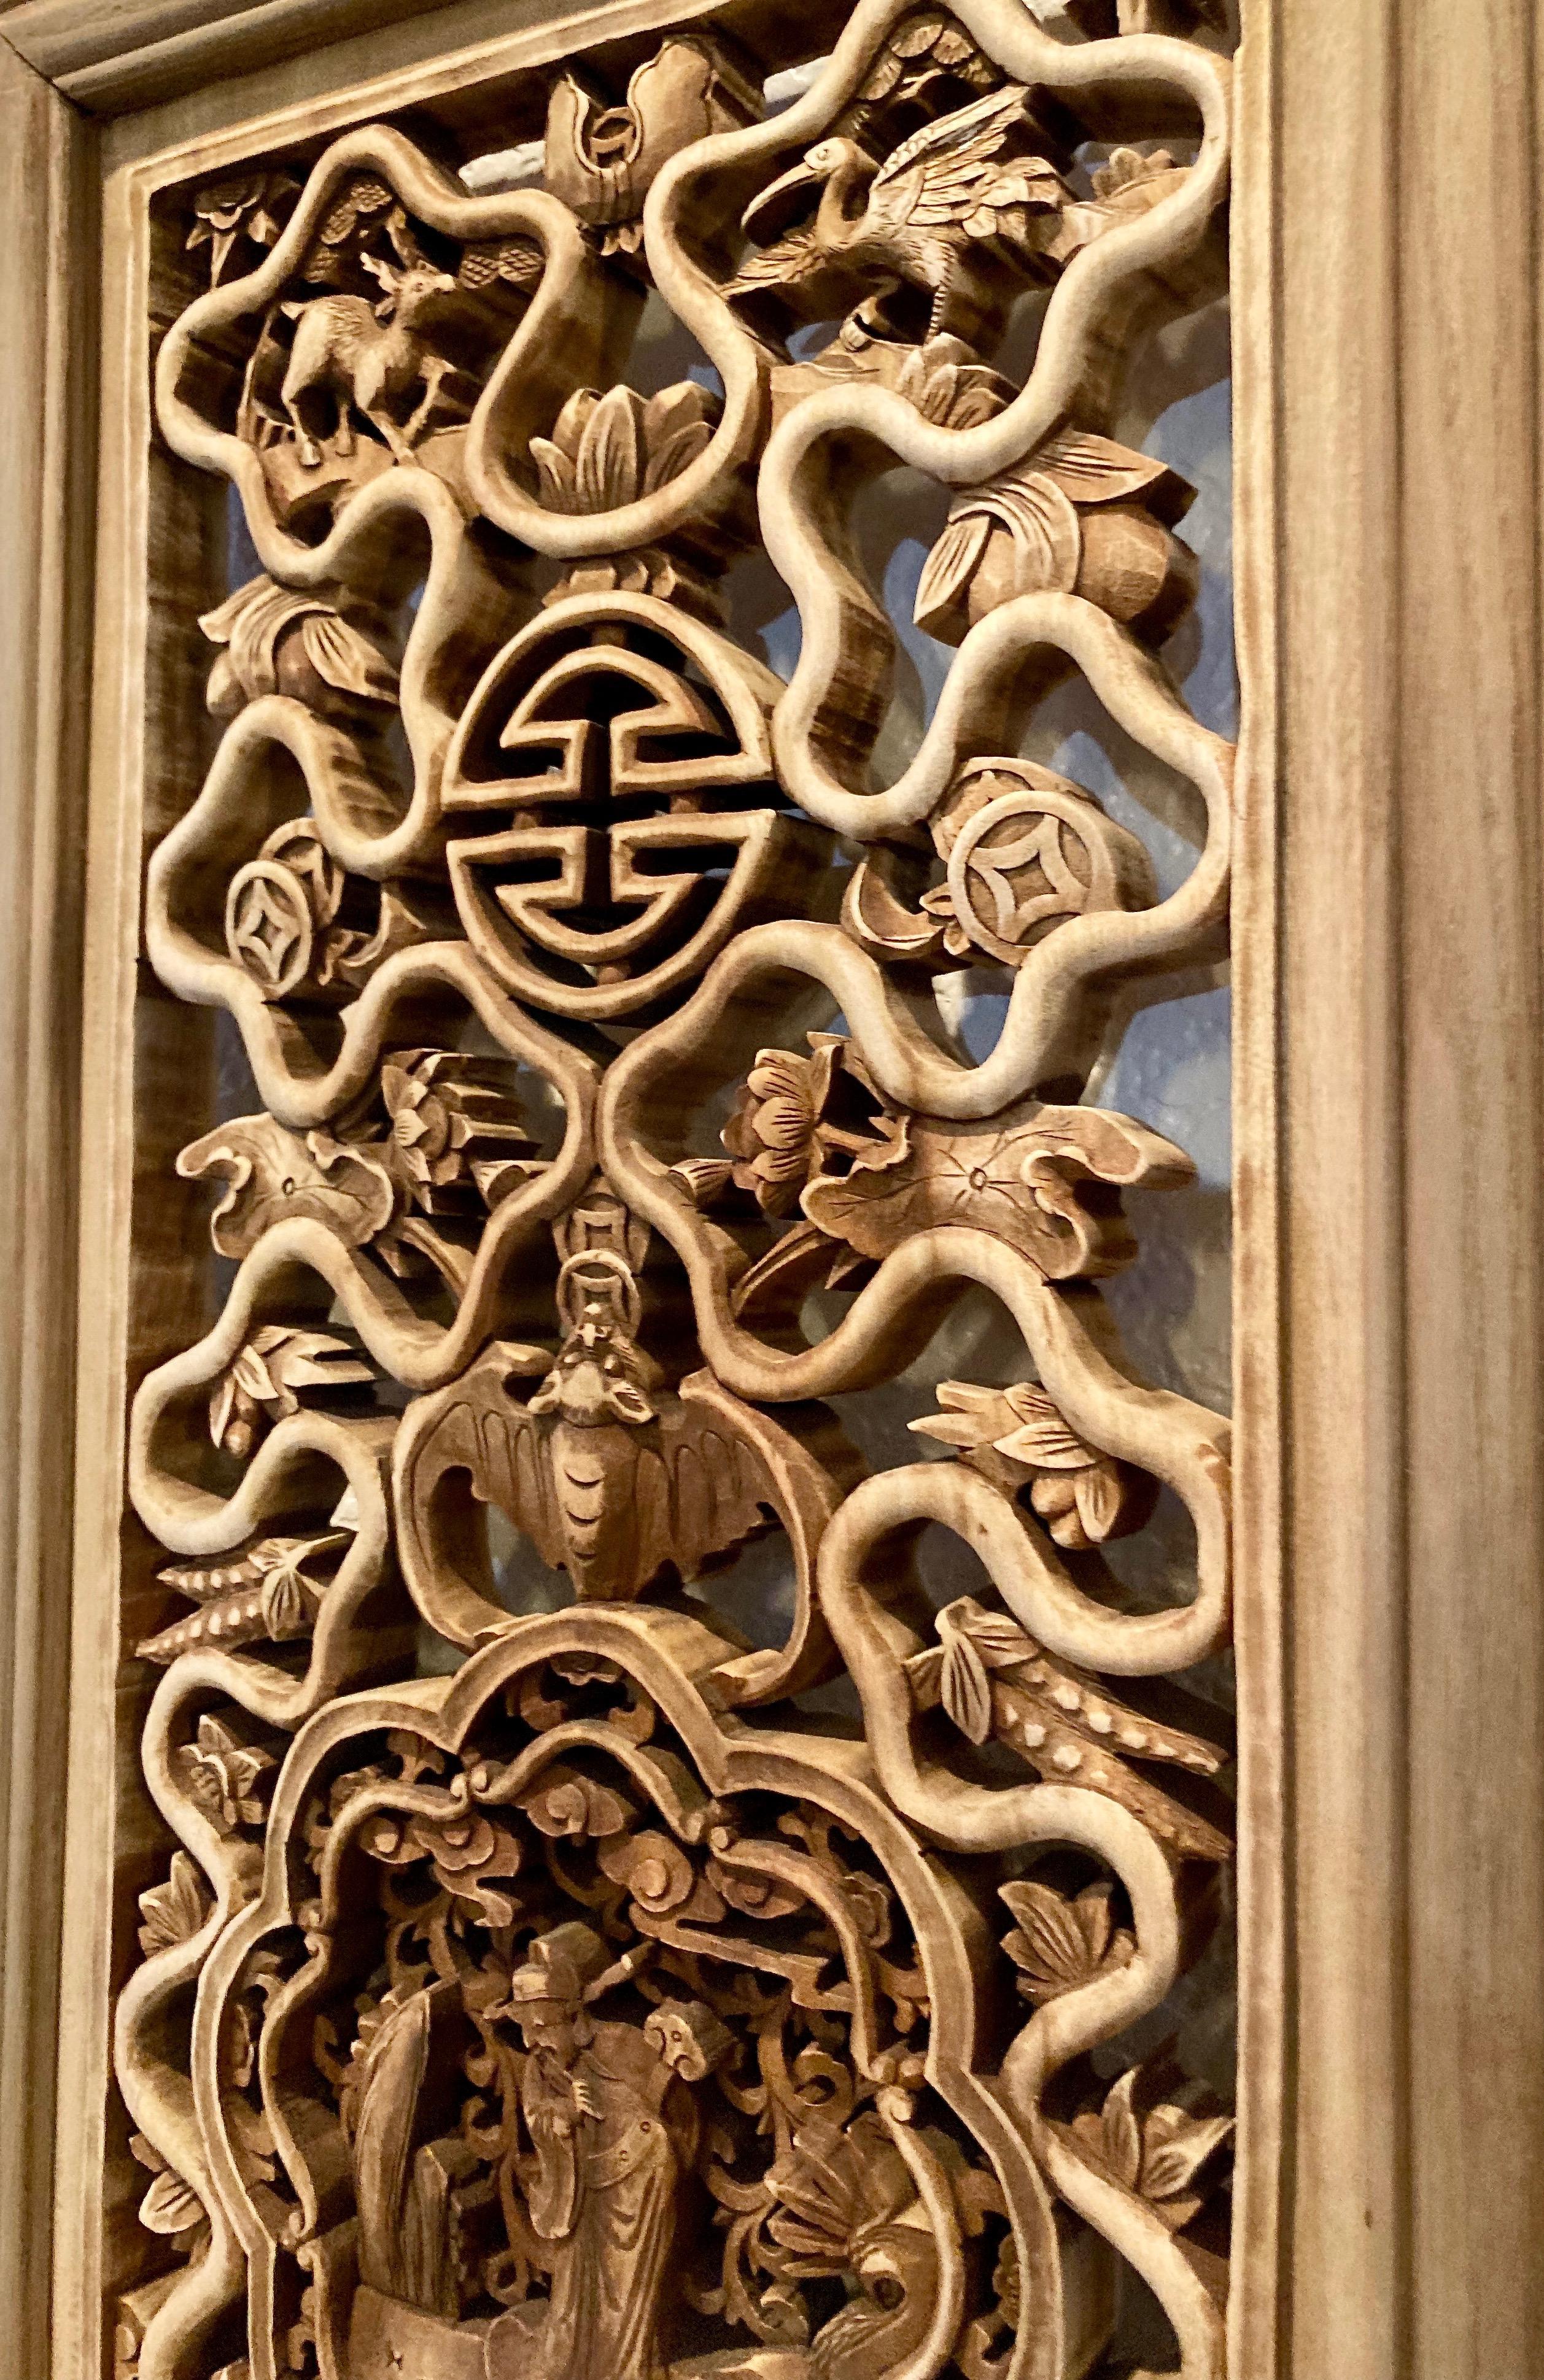 This ornately designed framed panel includes a plum blossom shaped center carving with personage, and surrounding geometric patterns, bat and creature motifs.